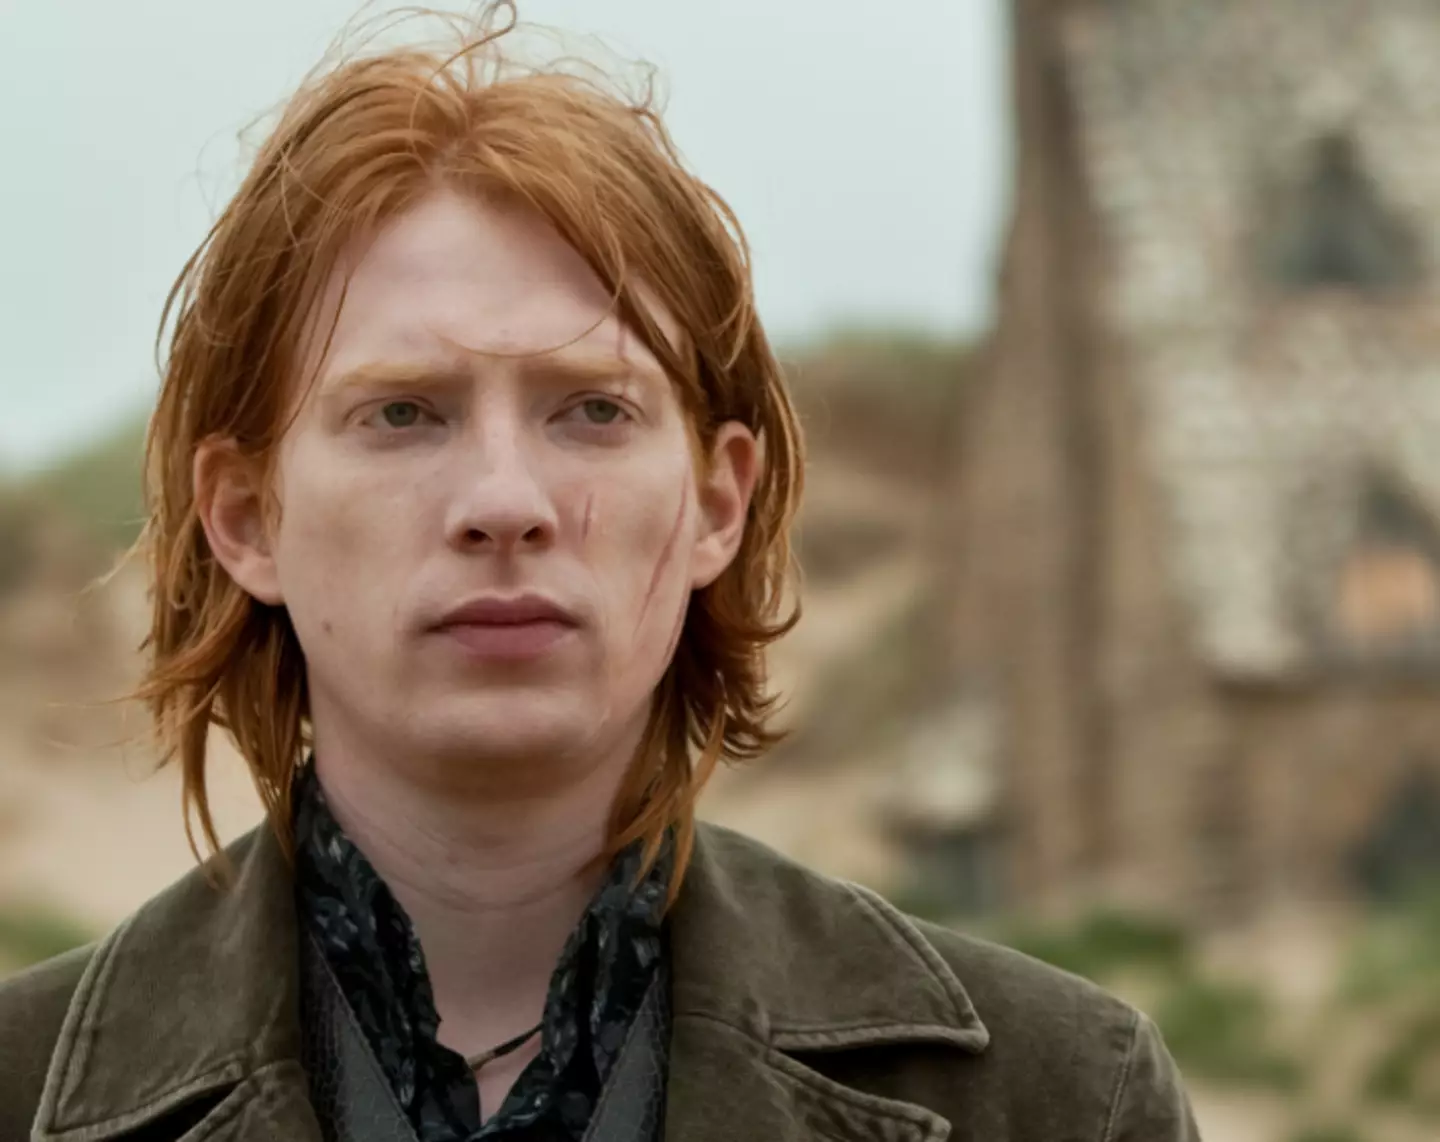 Domnhall Gleeson played Bill Weasley in later movies. (Warner Bros.)